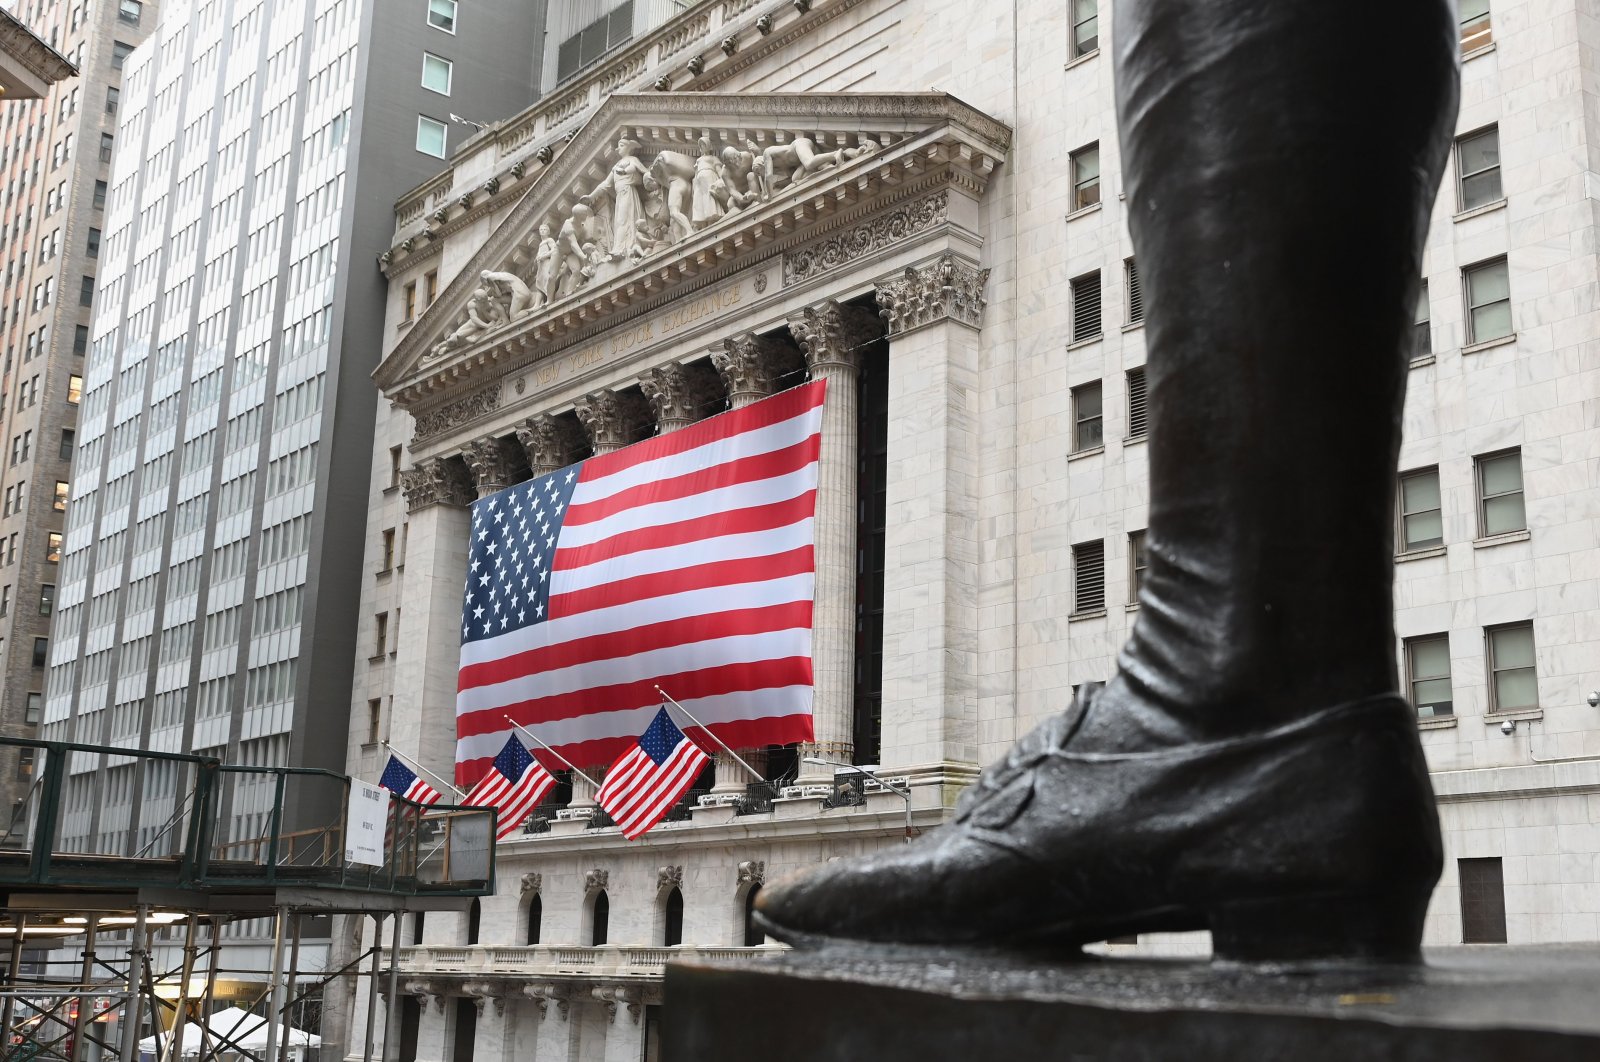 The New York Stock Exchange is seen on Wall Street in New York City, March 23, 2020. (AFP Photo)